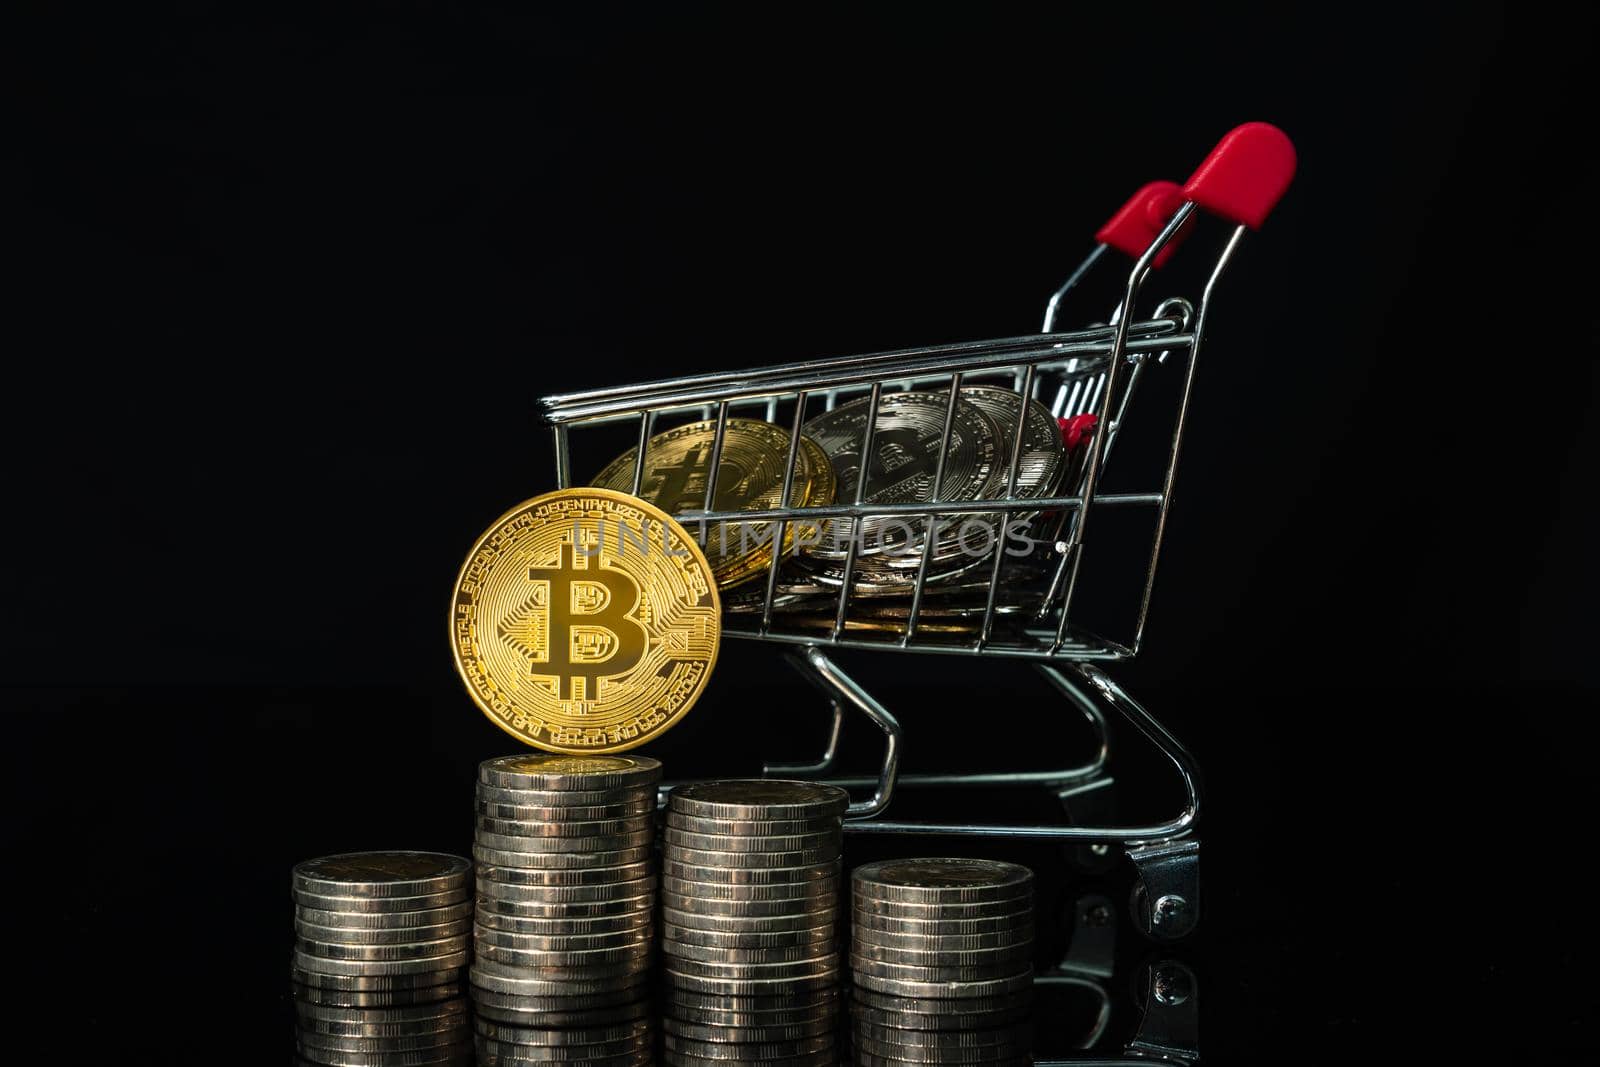 Bitcoin coin in shopping cart with black background by stoonn